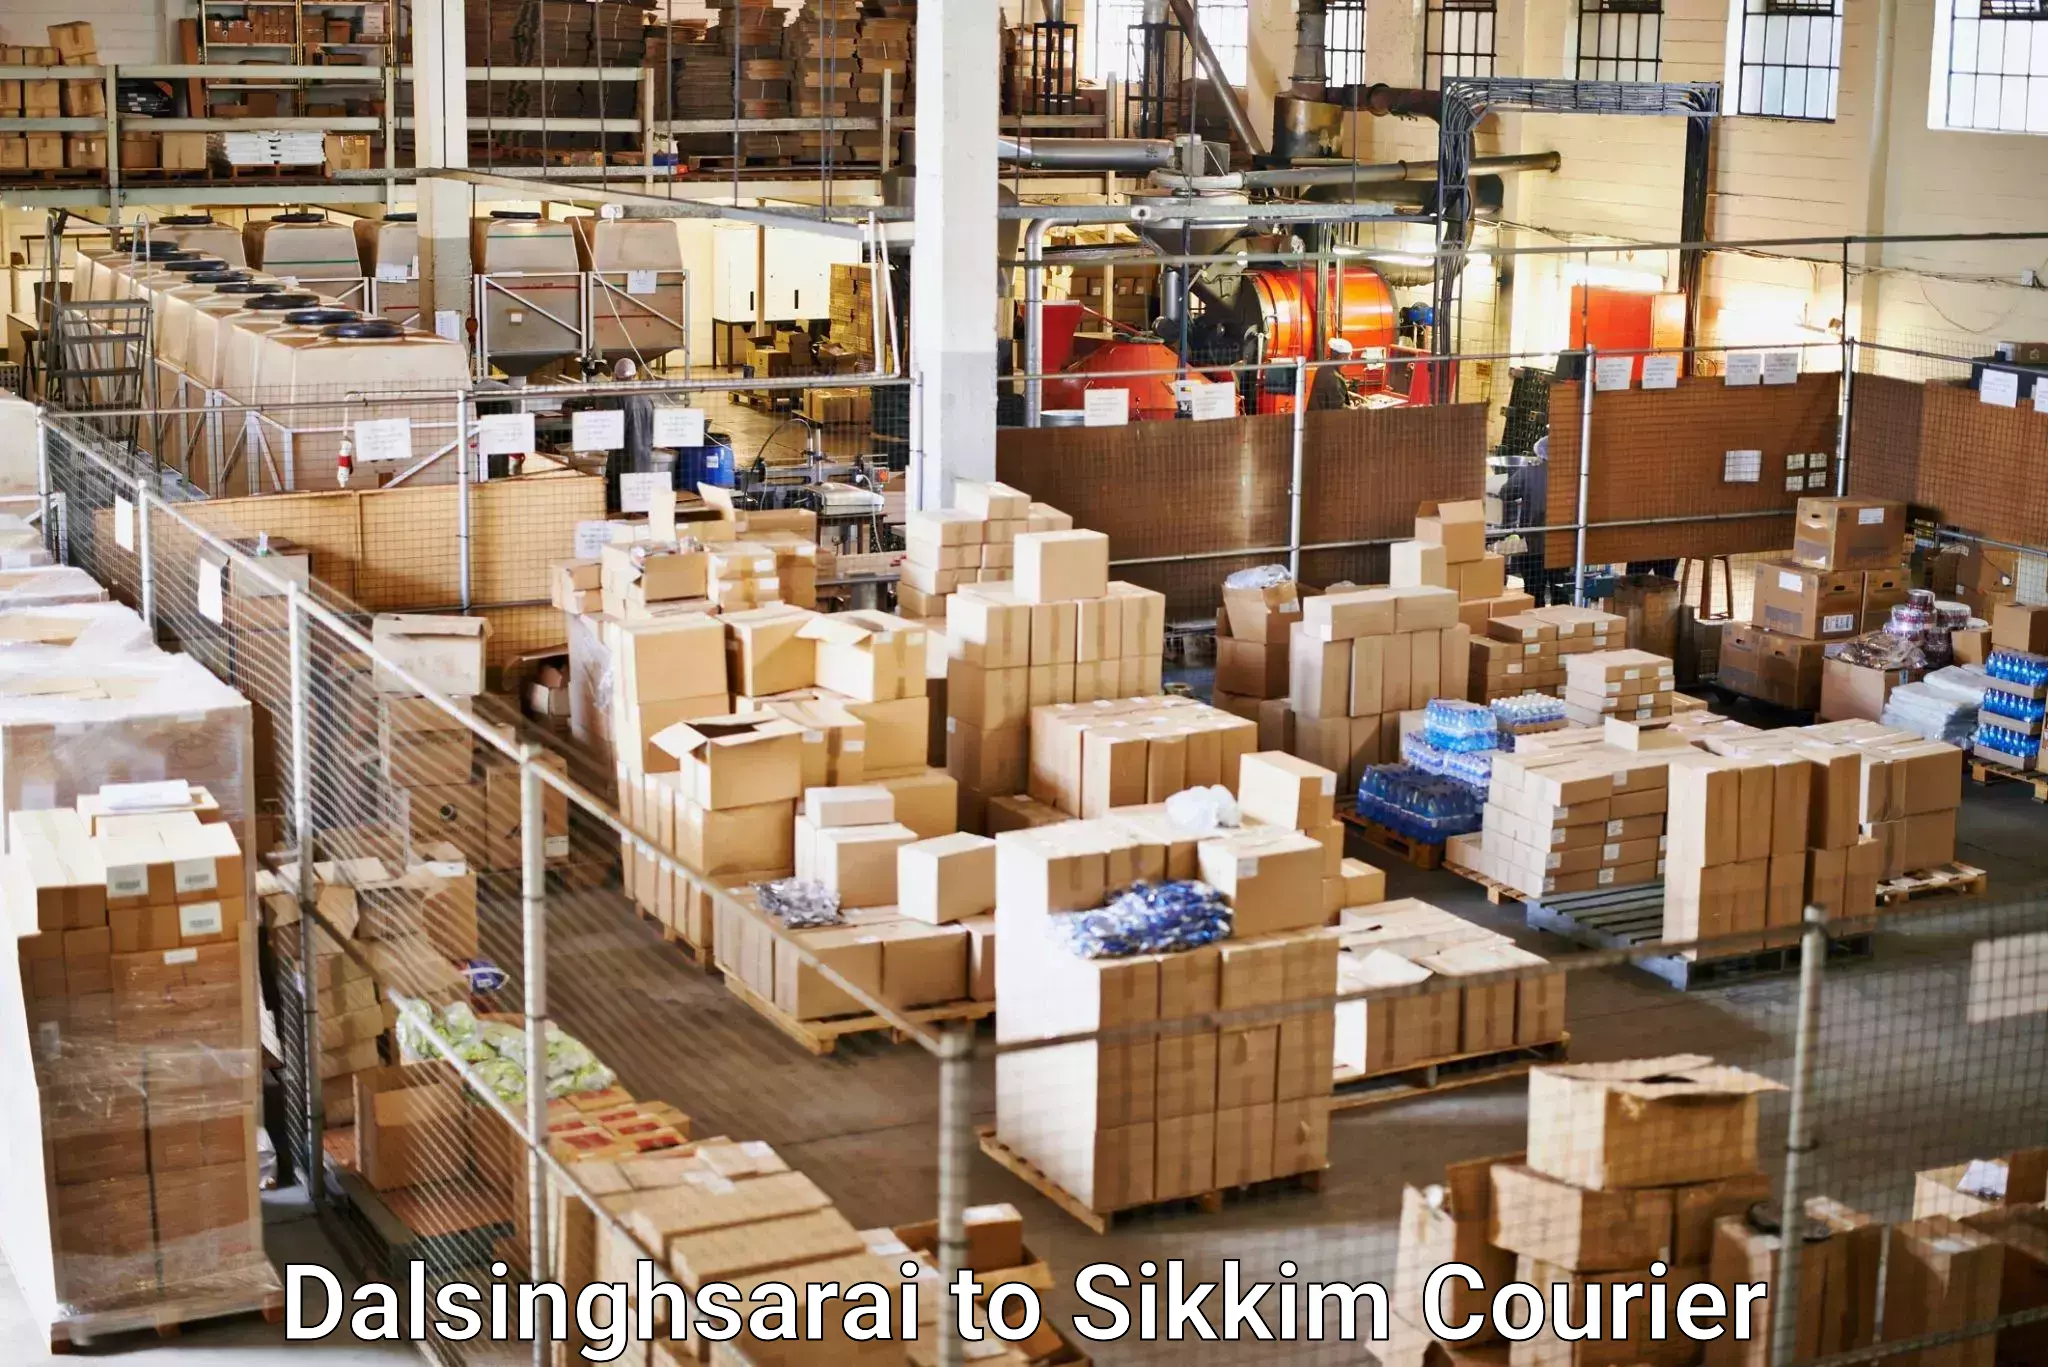 Fast shipping solutions Dalsinghsarai to Rangpo